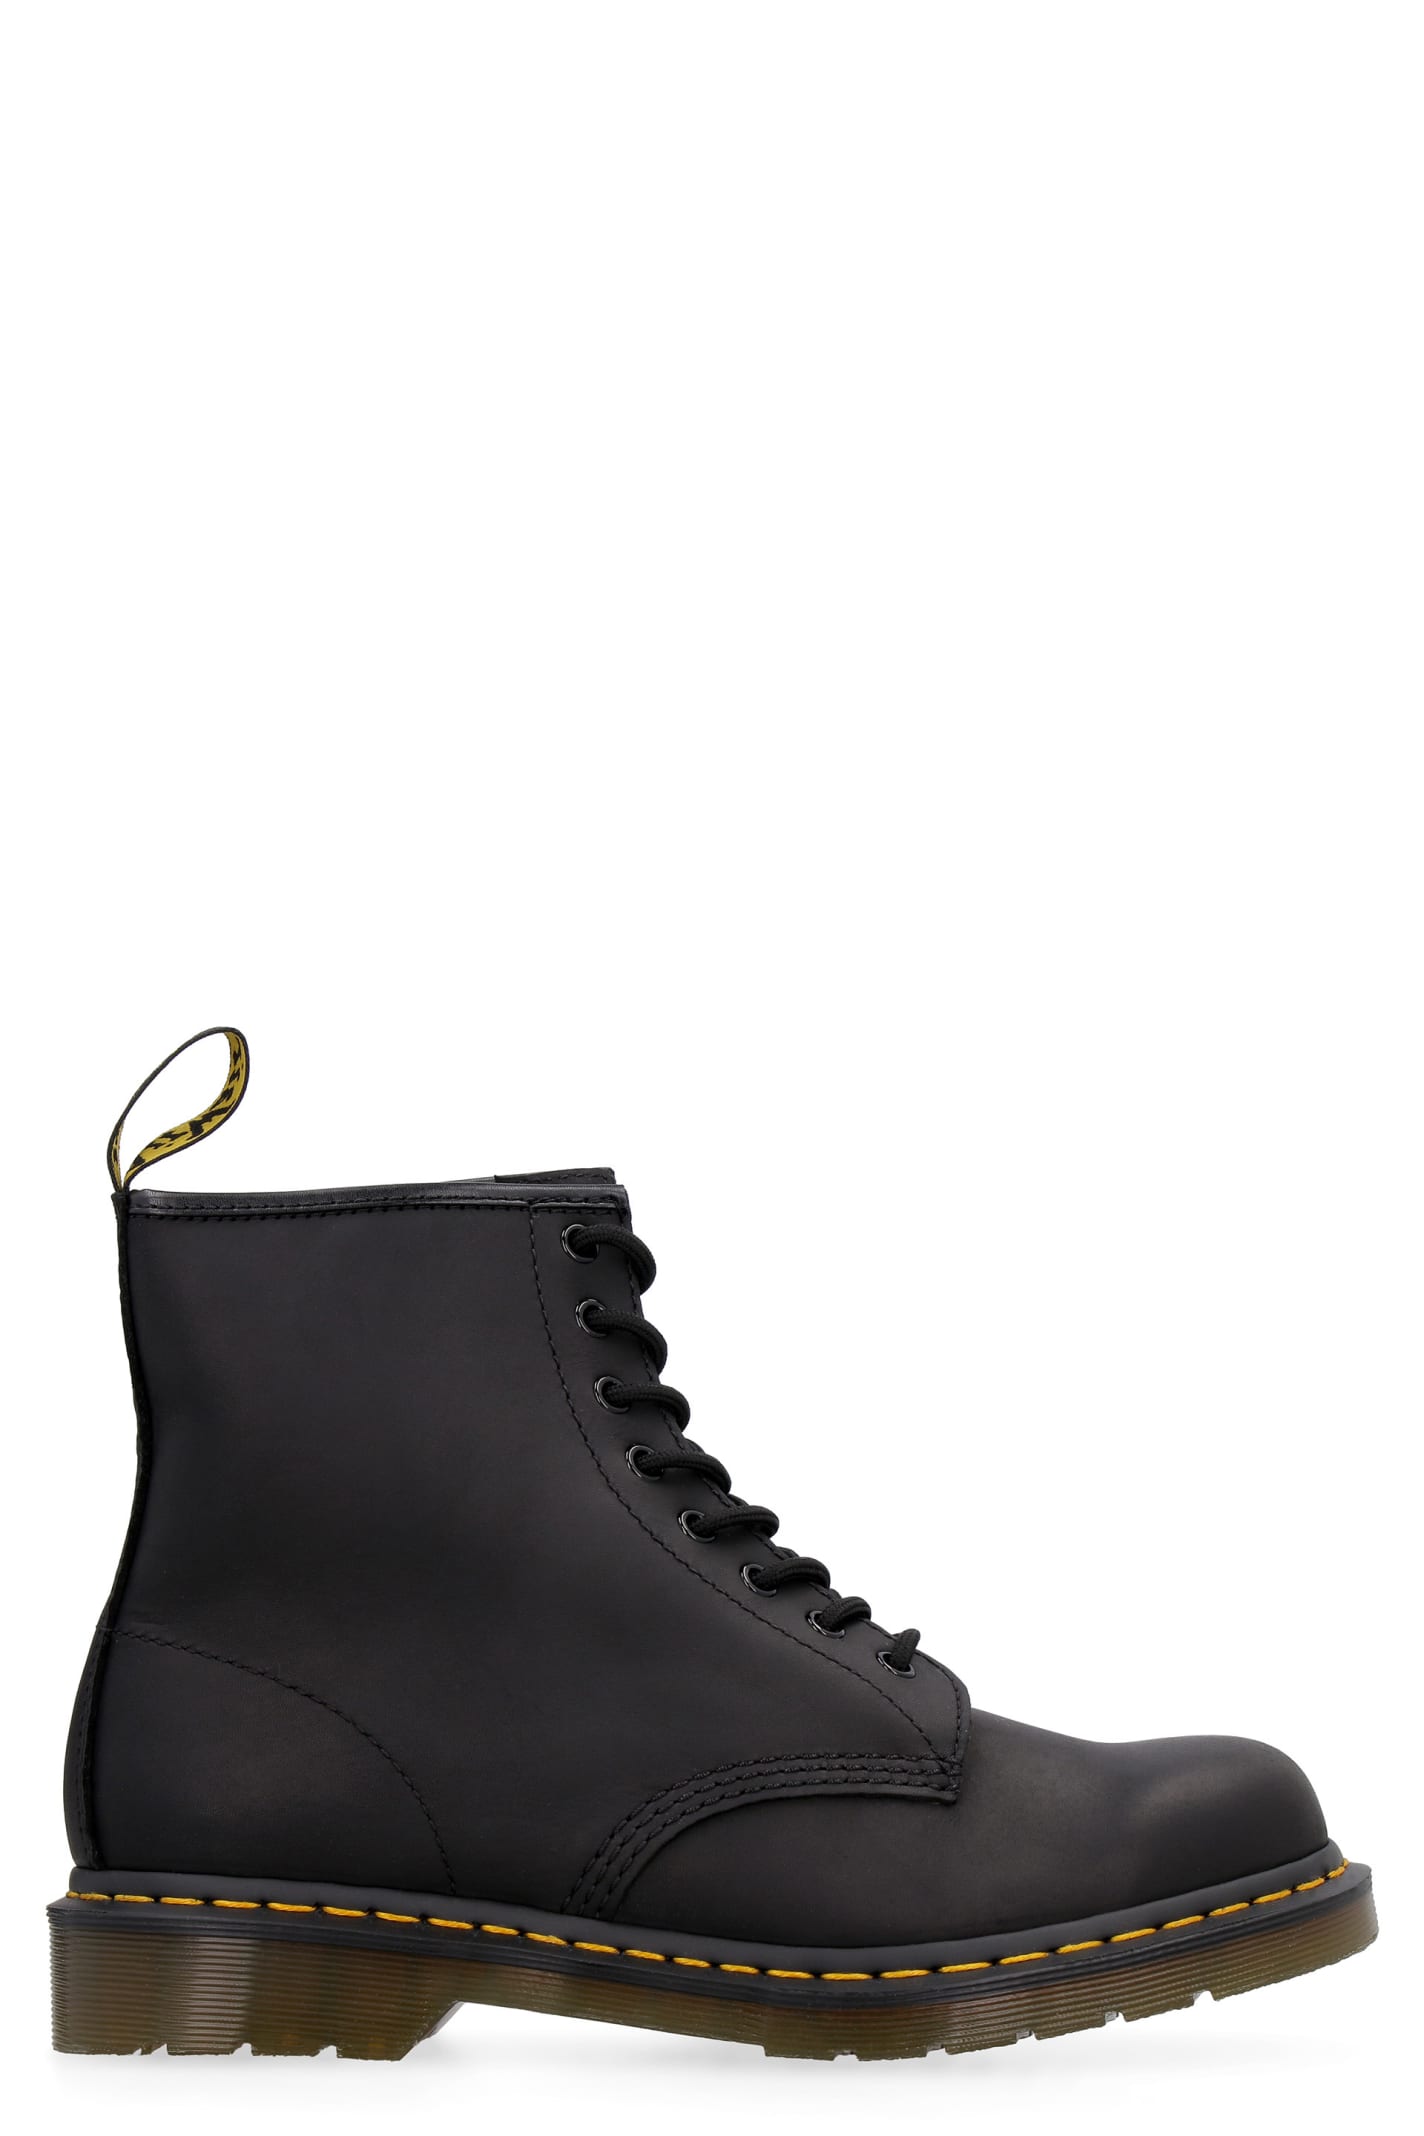 Buy Dr. Martens 1460 Leather Combat-boots online, shop Dr. Martens shoes with free shipping